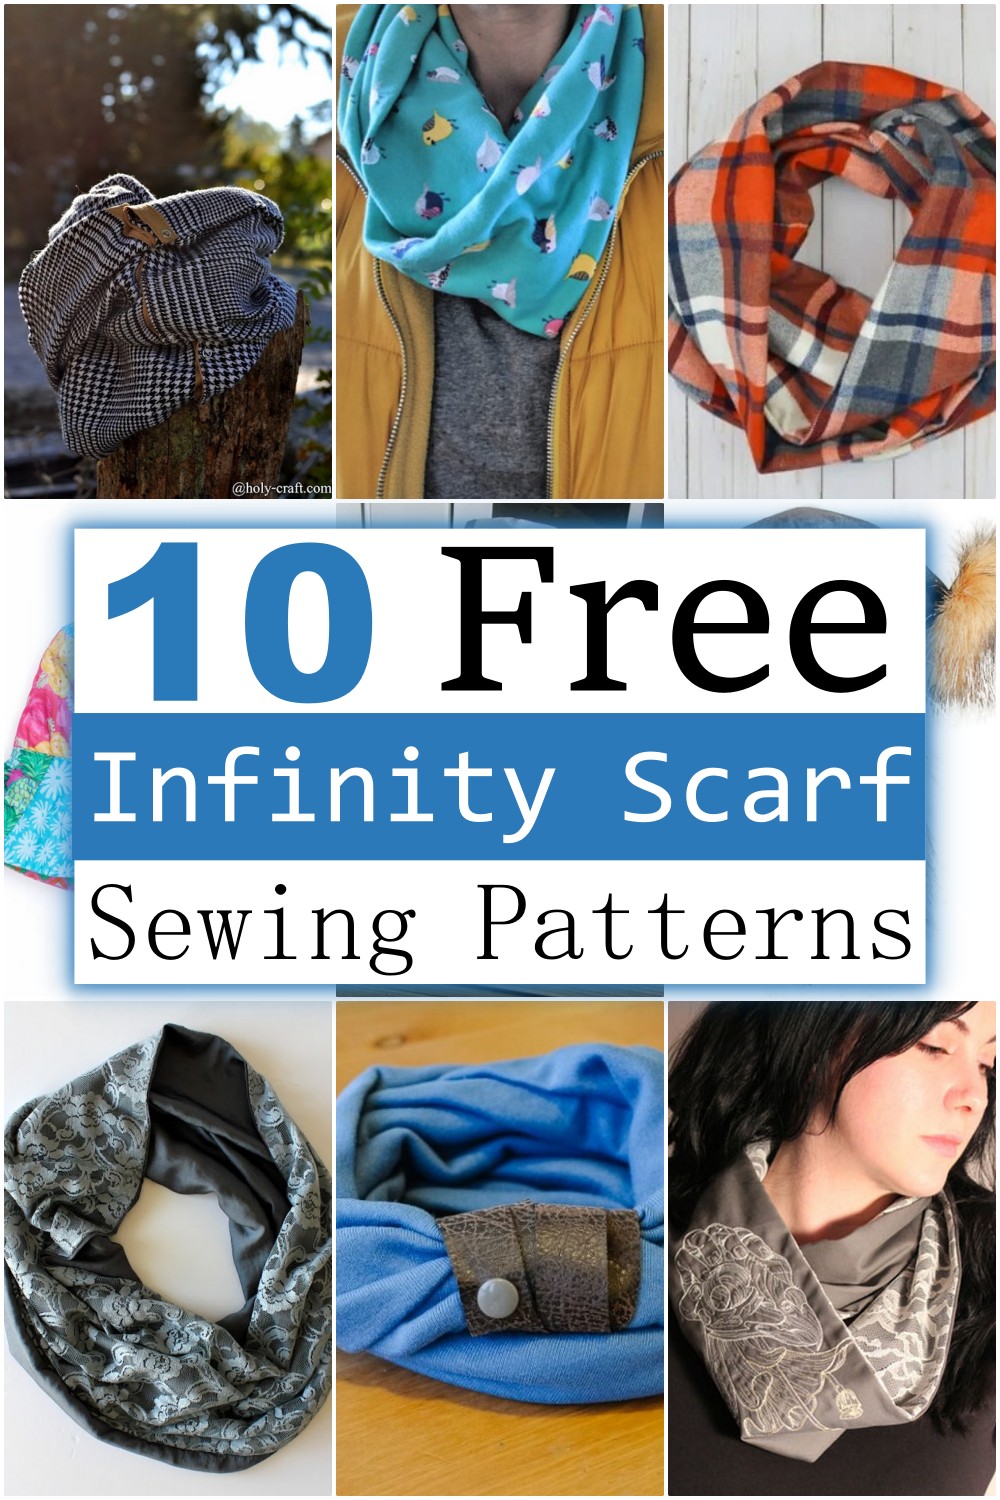 Free Infinity Scarf Sewing Patterns